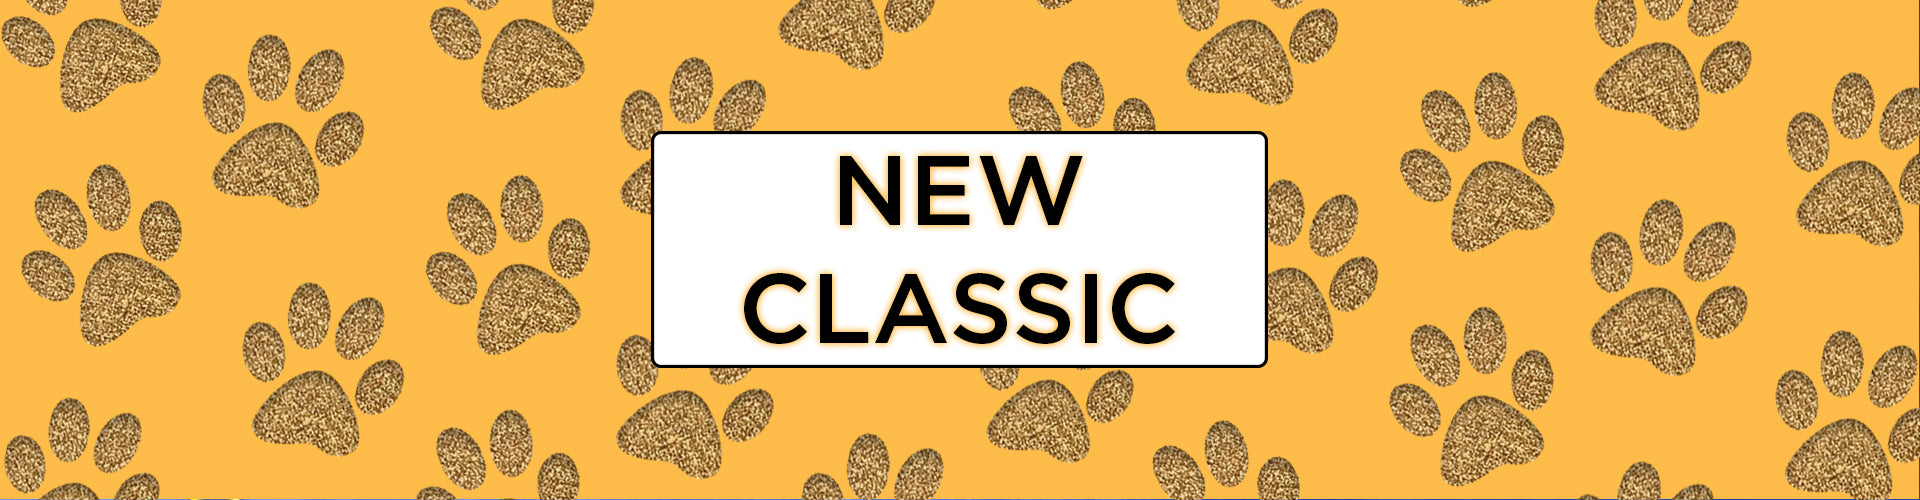 Get Your Paws On NEW Classic